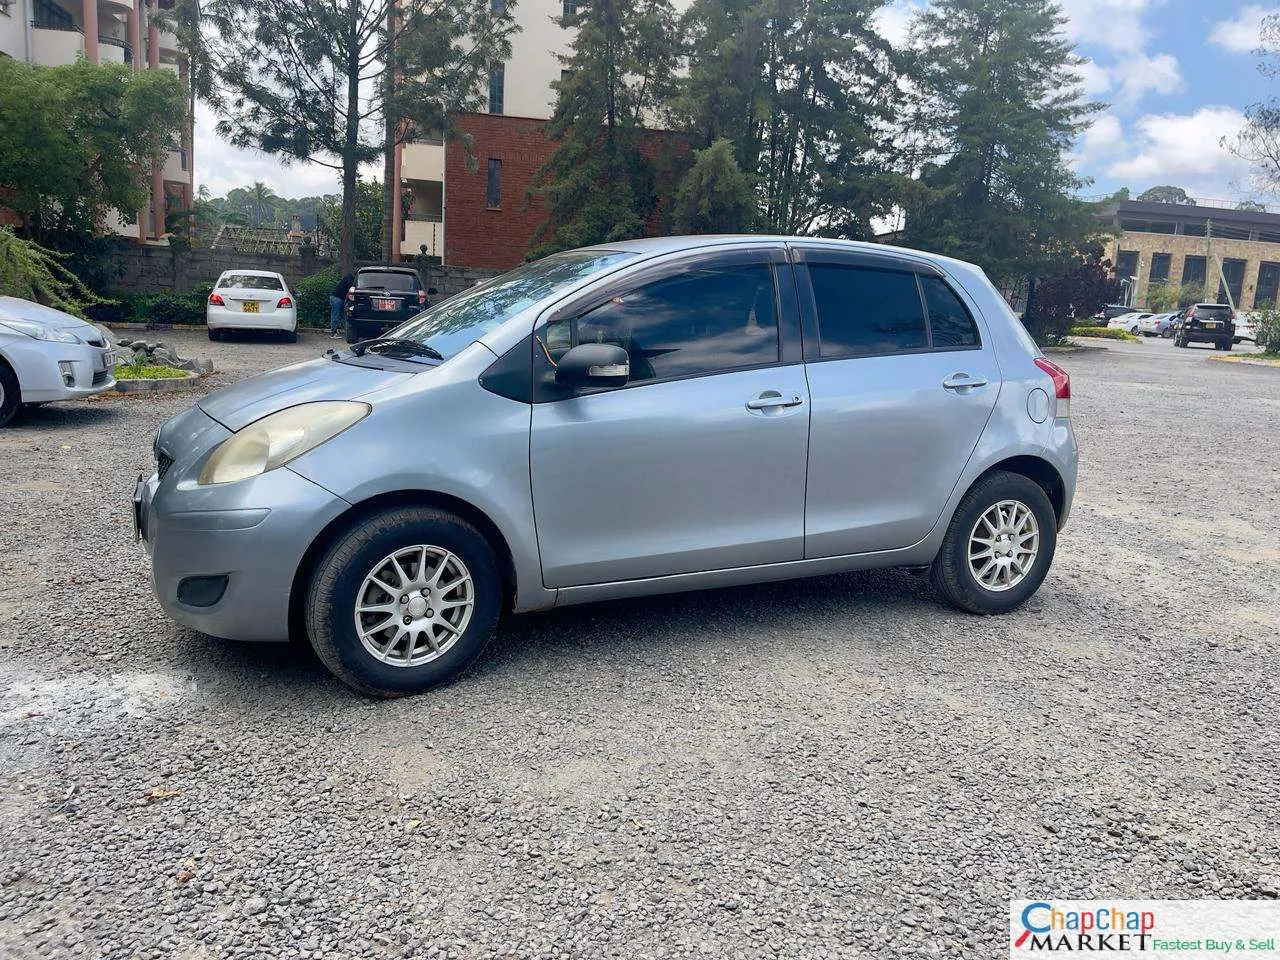 Toyota Vitz 1300cc Pay 30% Deposit Trade in OK EXCLUSIVE Hire purchase installments